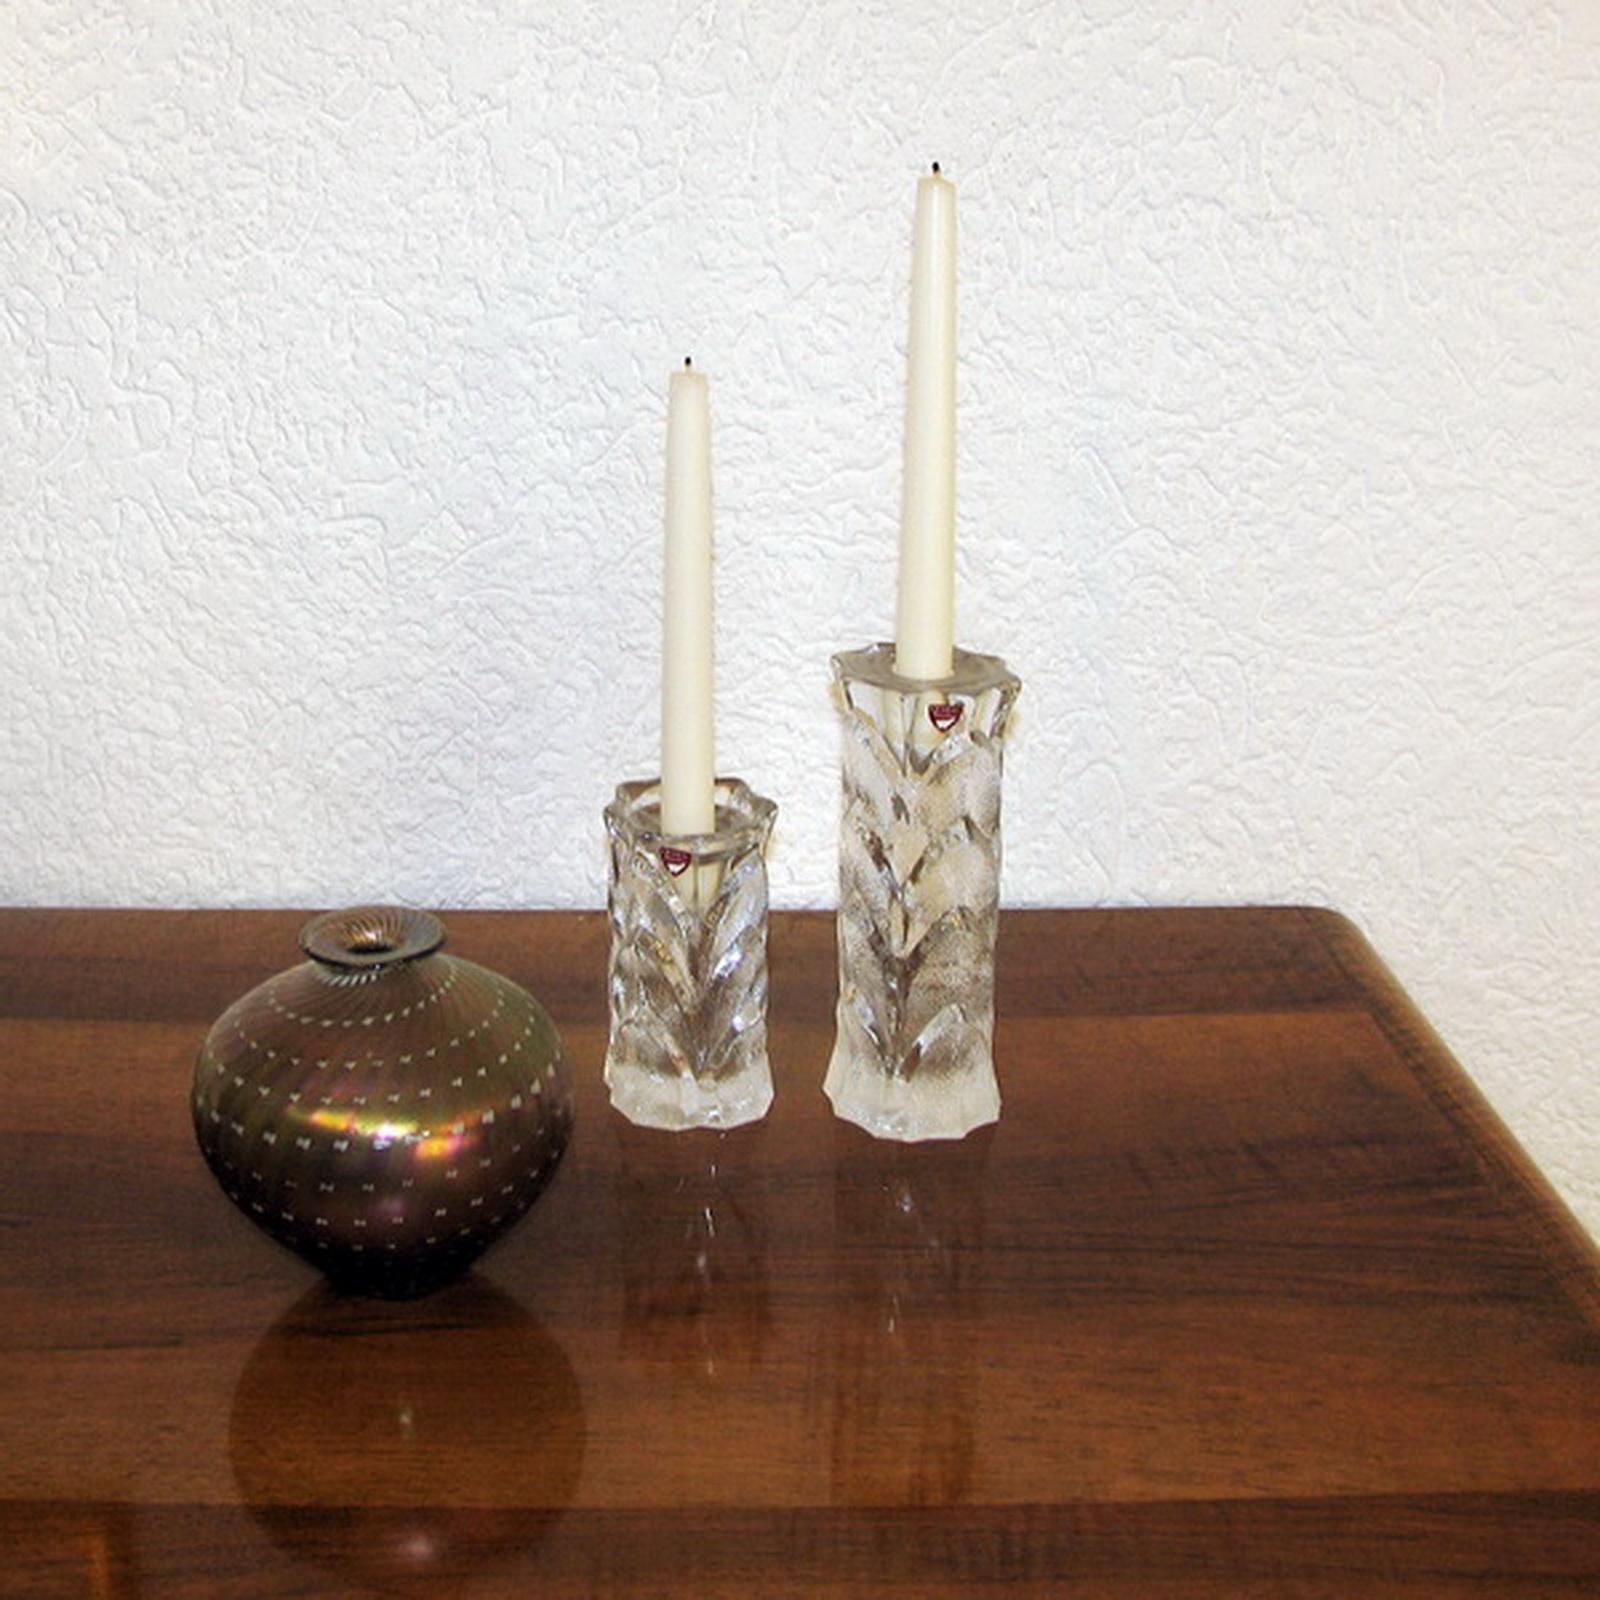 Vintage Orrefors crystal candleholders, nice relief surface vegetal motif, Sweden, 1970s. Heavy cast crystal, makers label to the front. Exceptional condition, some traces of stearin.

Dimensions:
The large one - height 19.5 cm, diameter 7